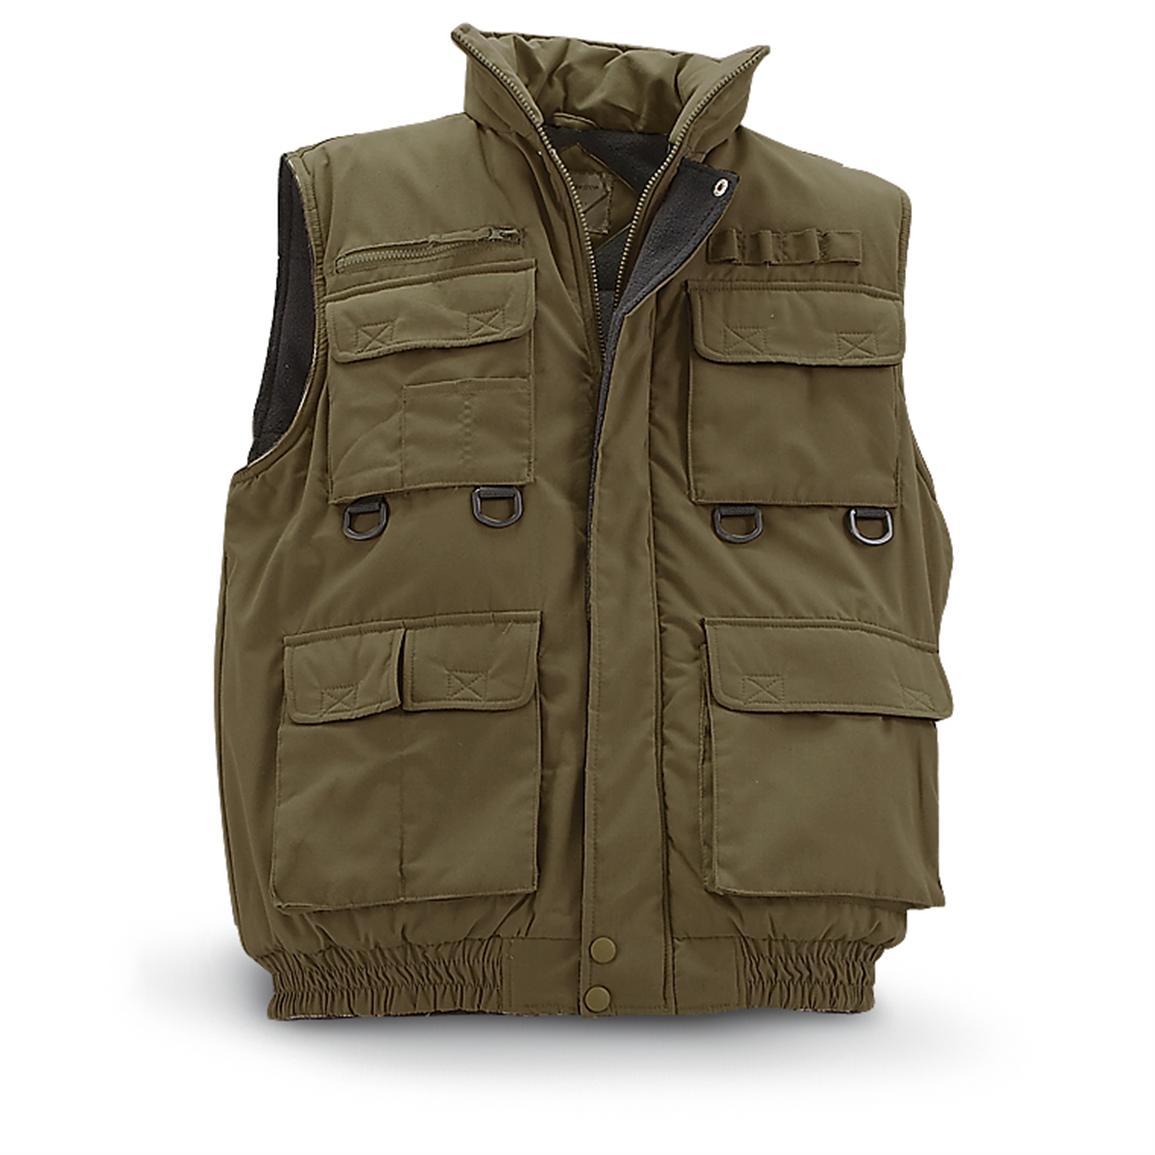 Fleece - lined Insulated Outdoor Vest - 185829, Vests at Sportsman's Guide